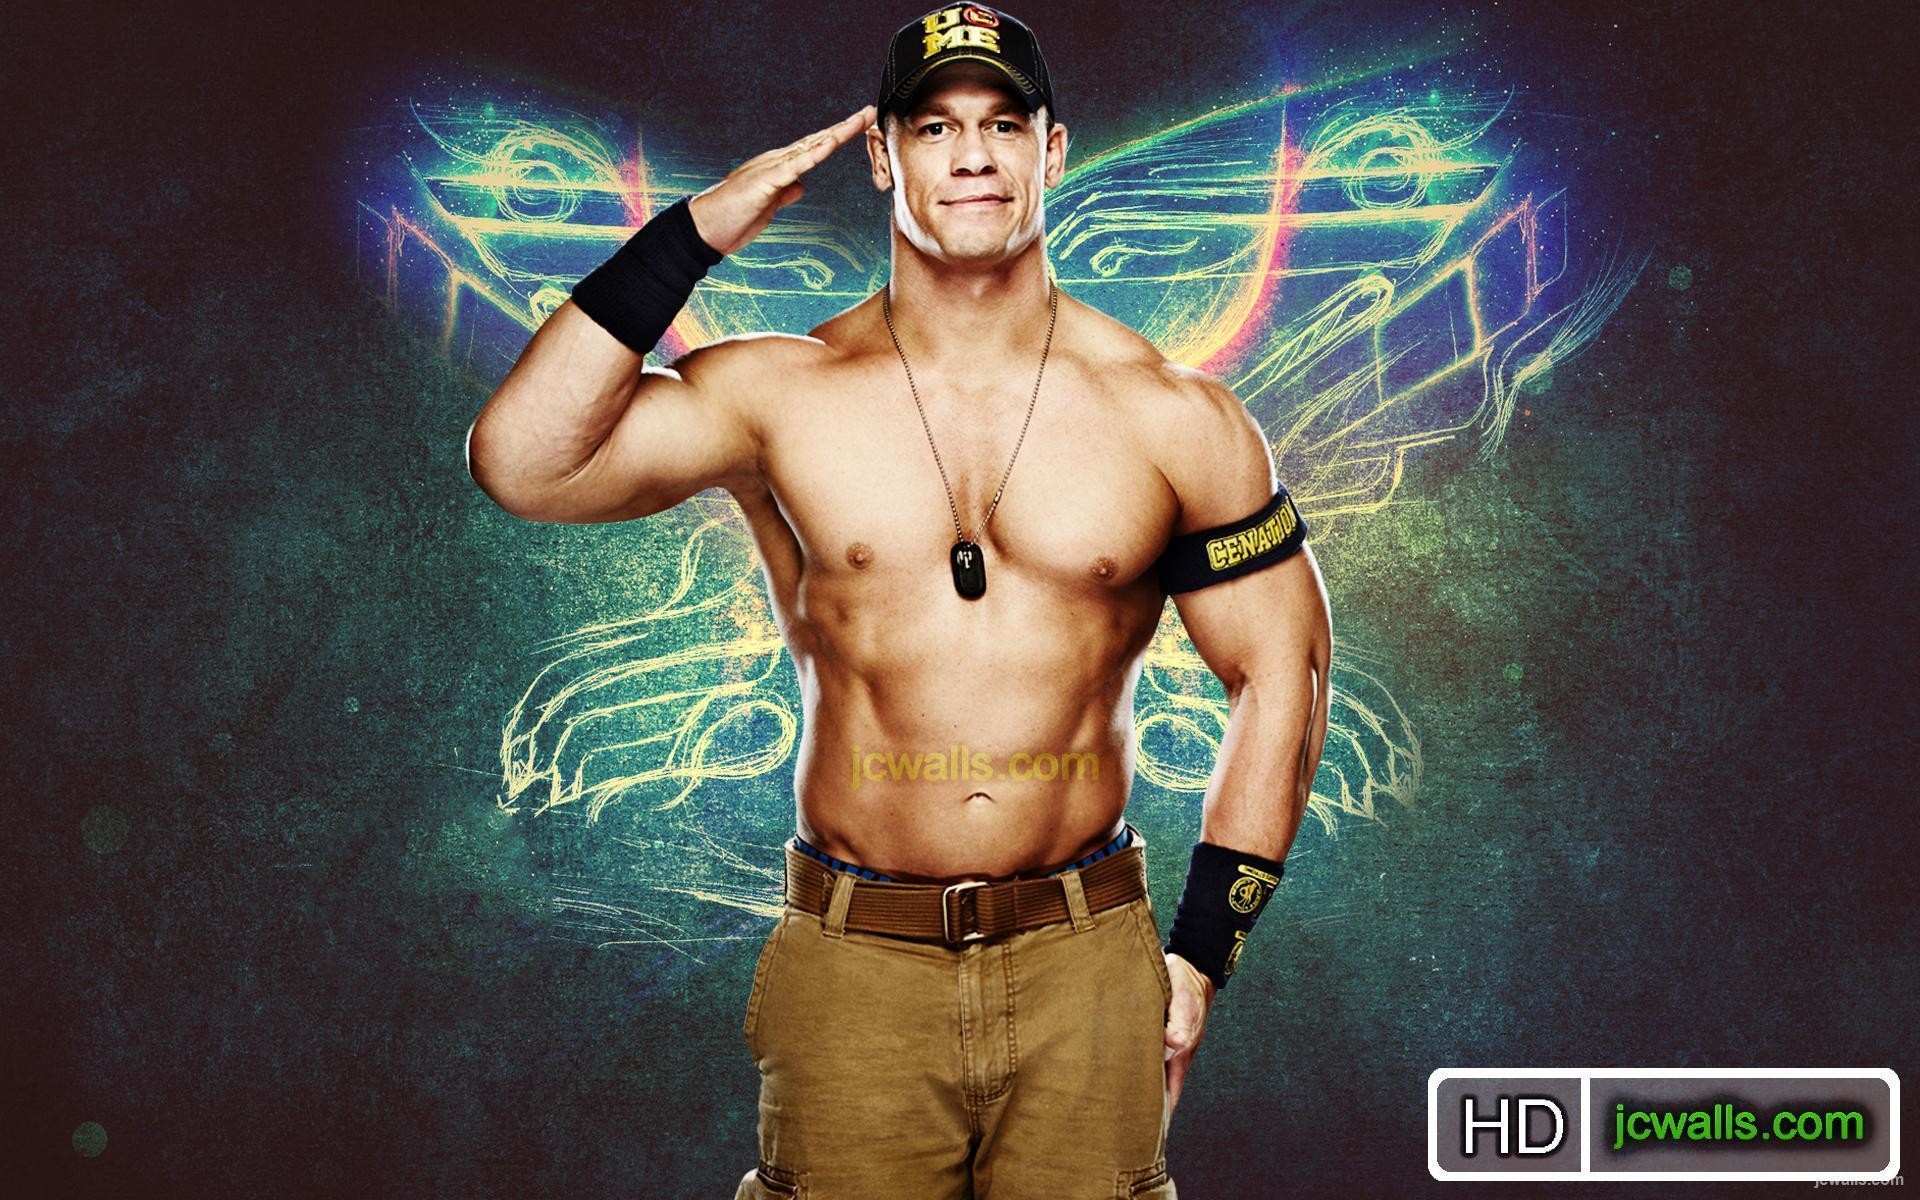 1920x1200 john cena wallpaper high definition for iphone - | Images And ..